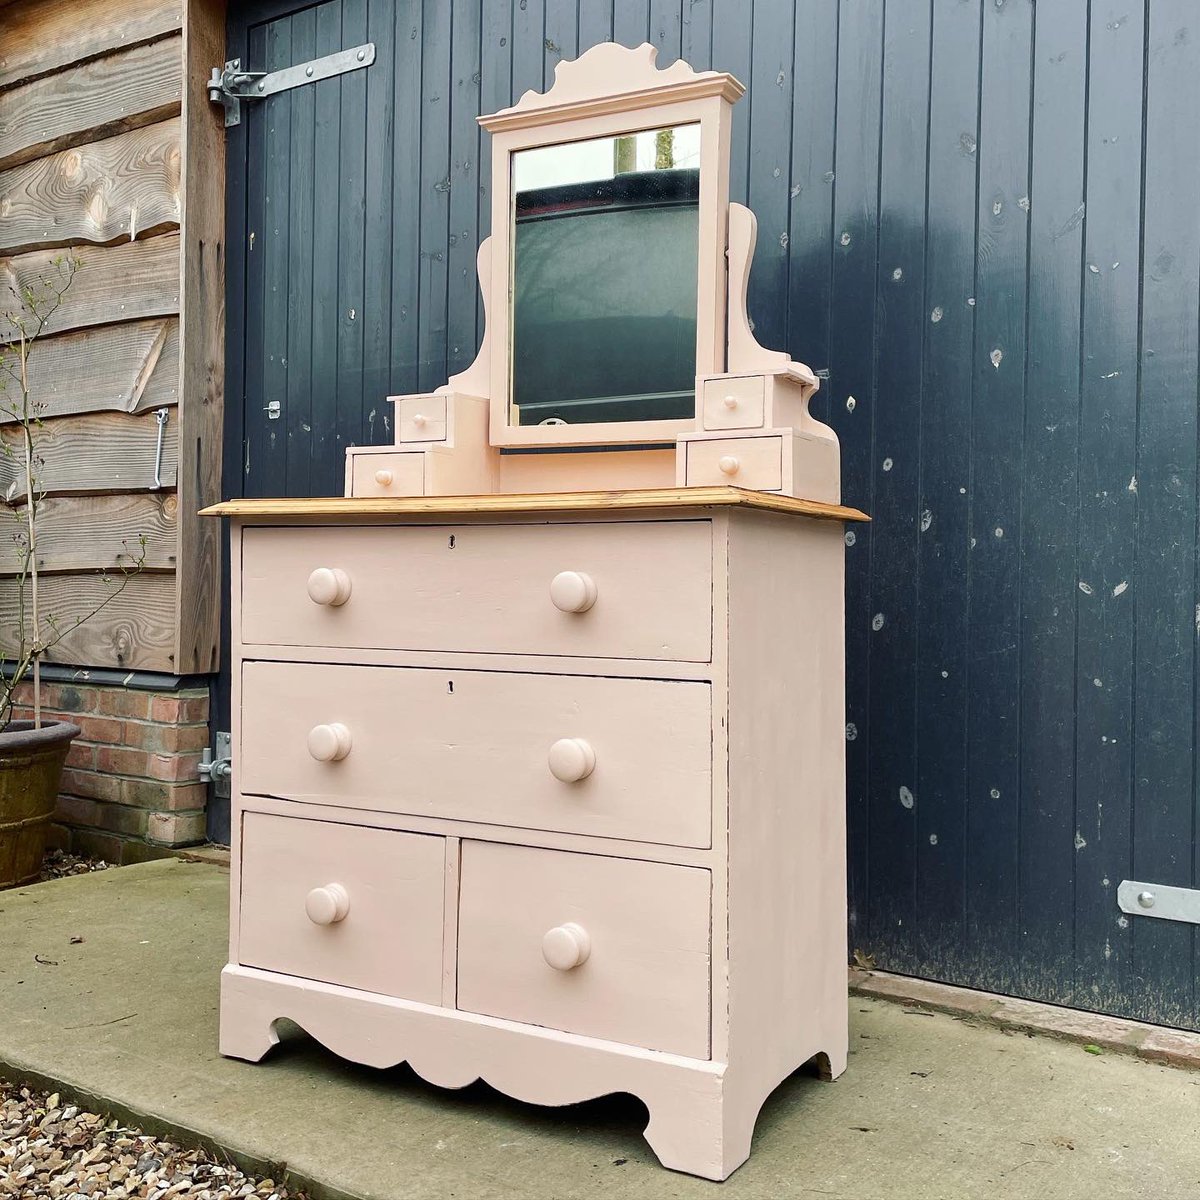 Sweet little painted antique pine dressing table with plenty of drawers 😍 #rwf #reworkedfurniture #pine #dressingtable #chestofdrawers #paintedfurniture #antique #dorset